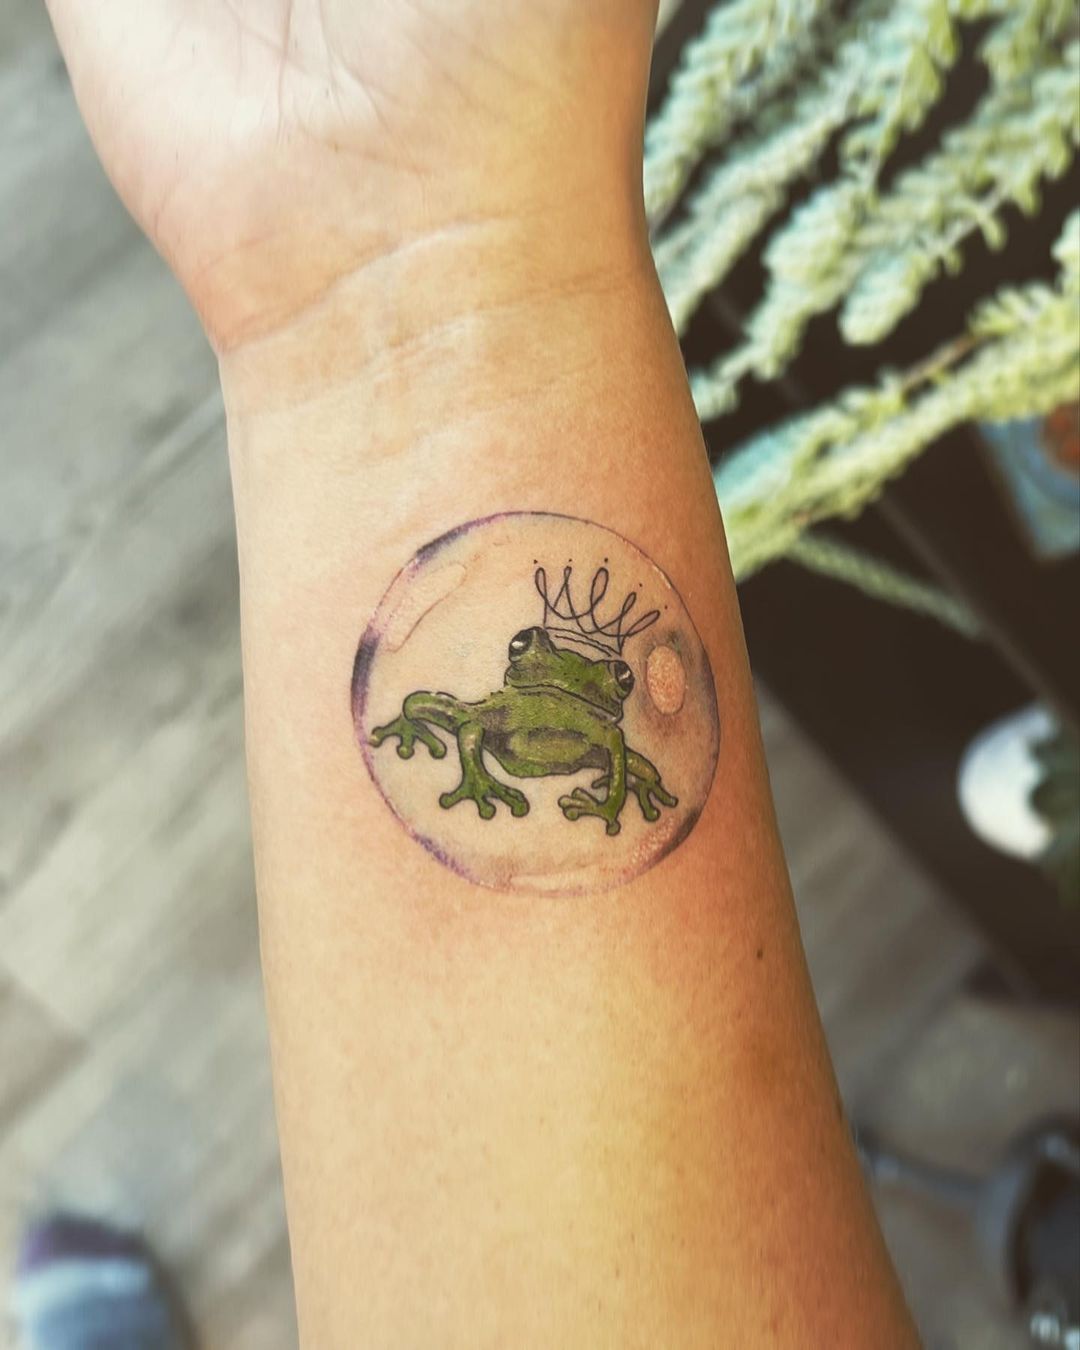 Saw someone else show their frog tattoo and while mine is not nearly as cool  I thought Id share   rfrogs